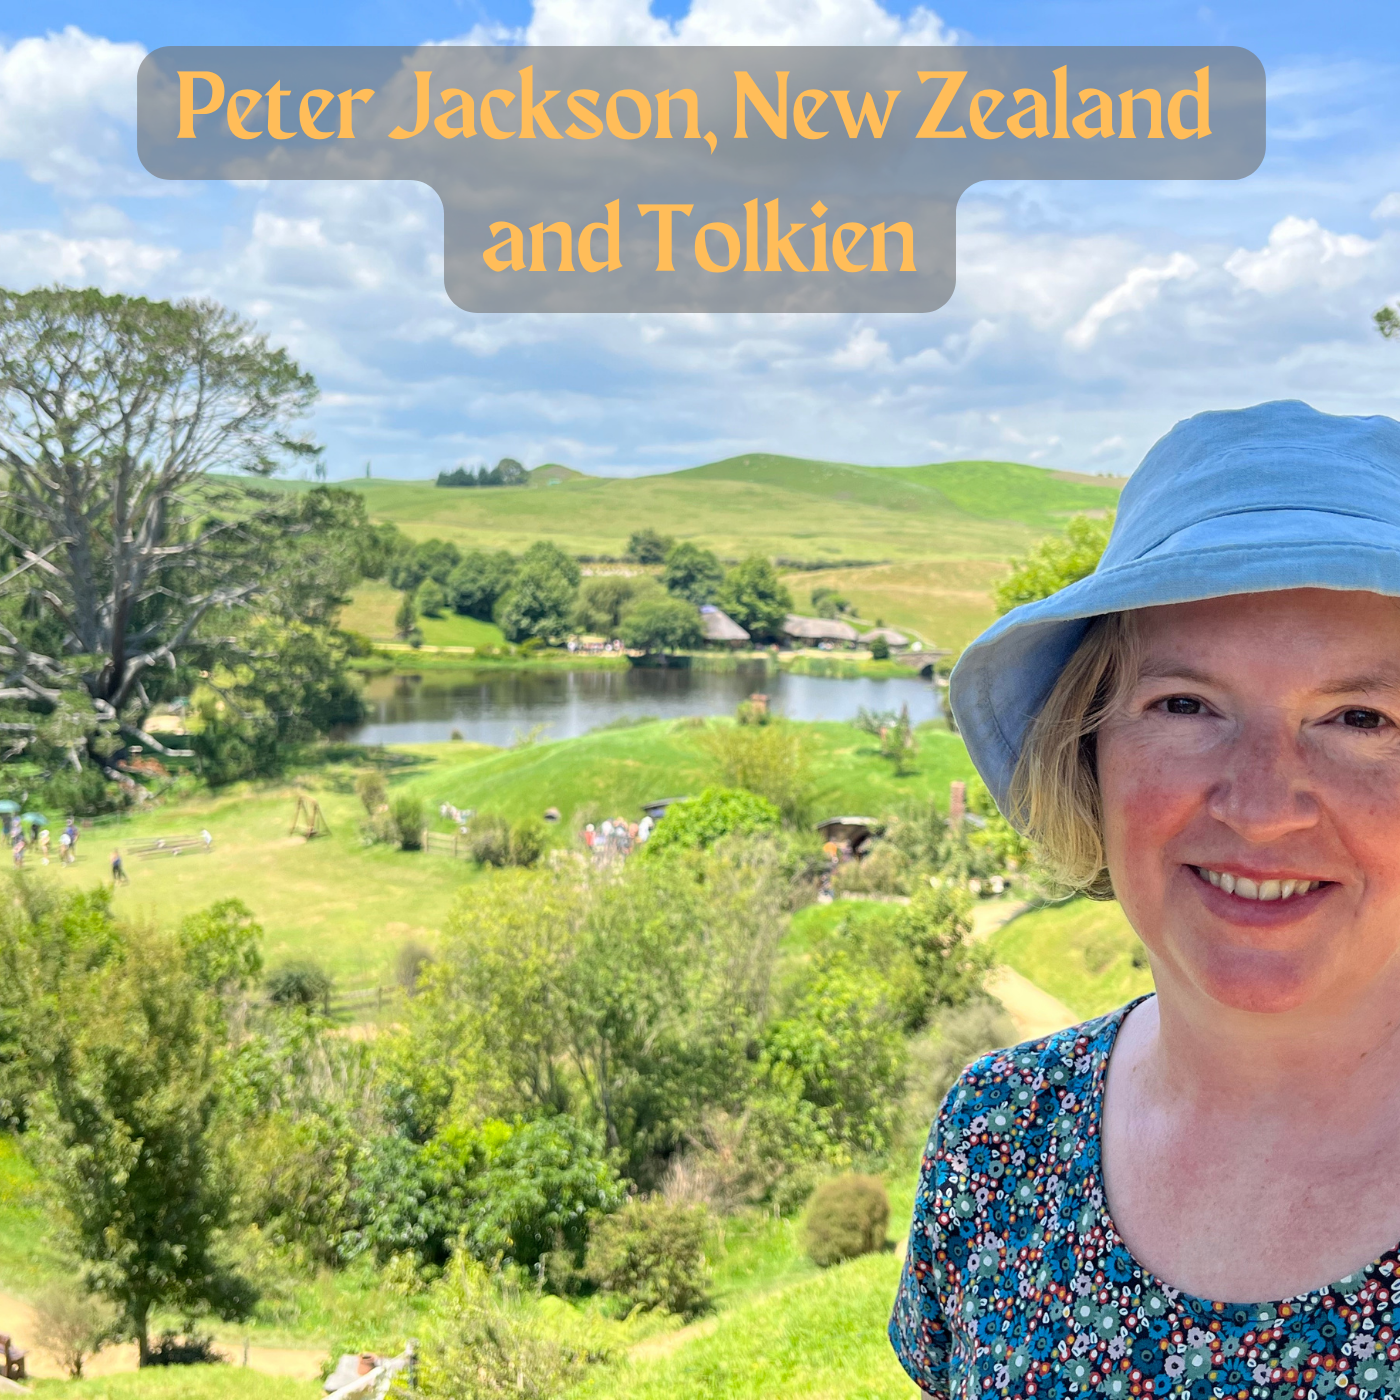 New Zealand and Peter Jackson